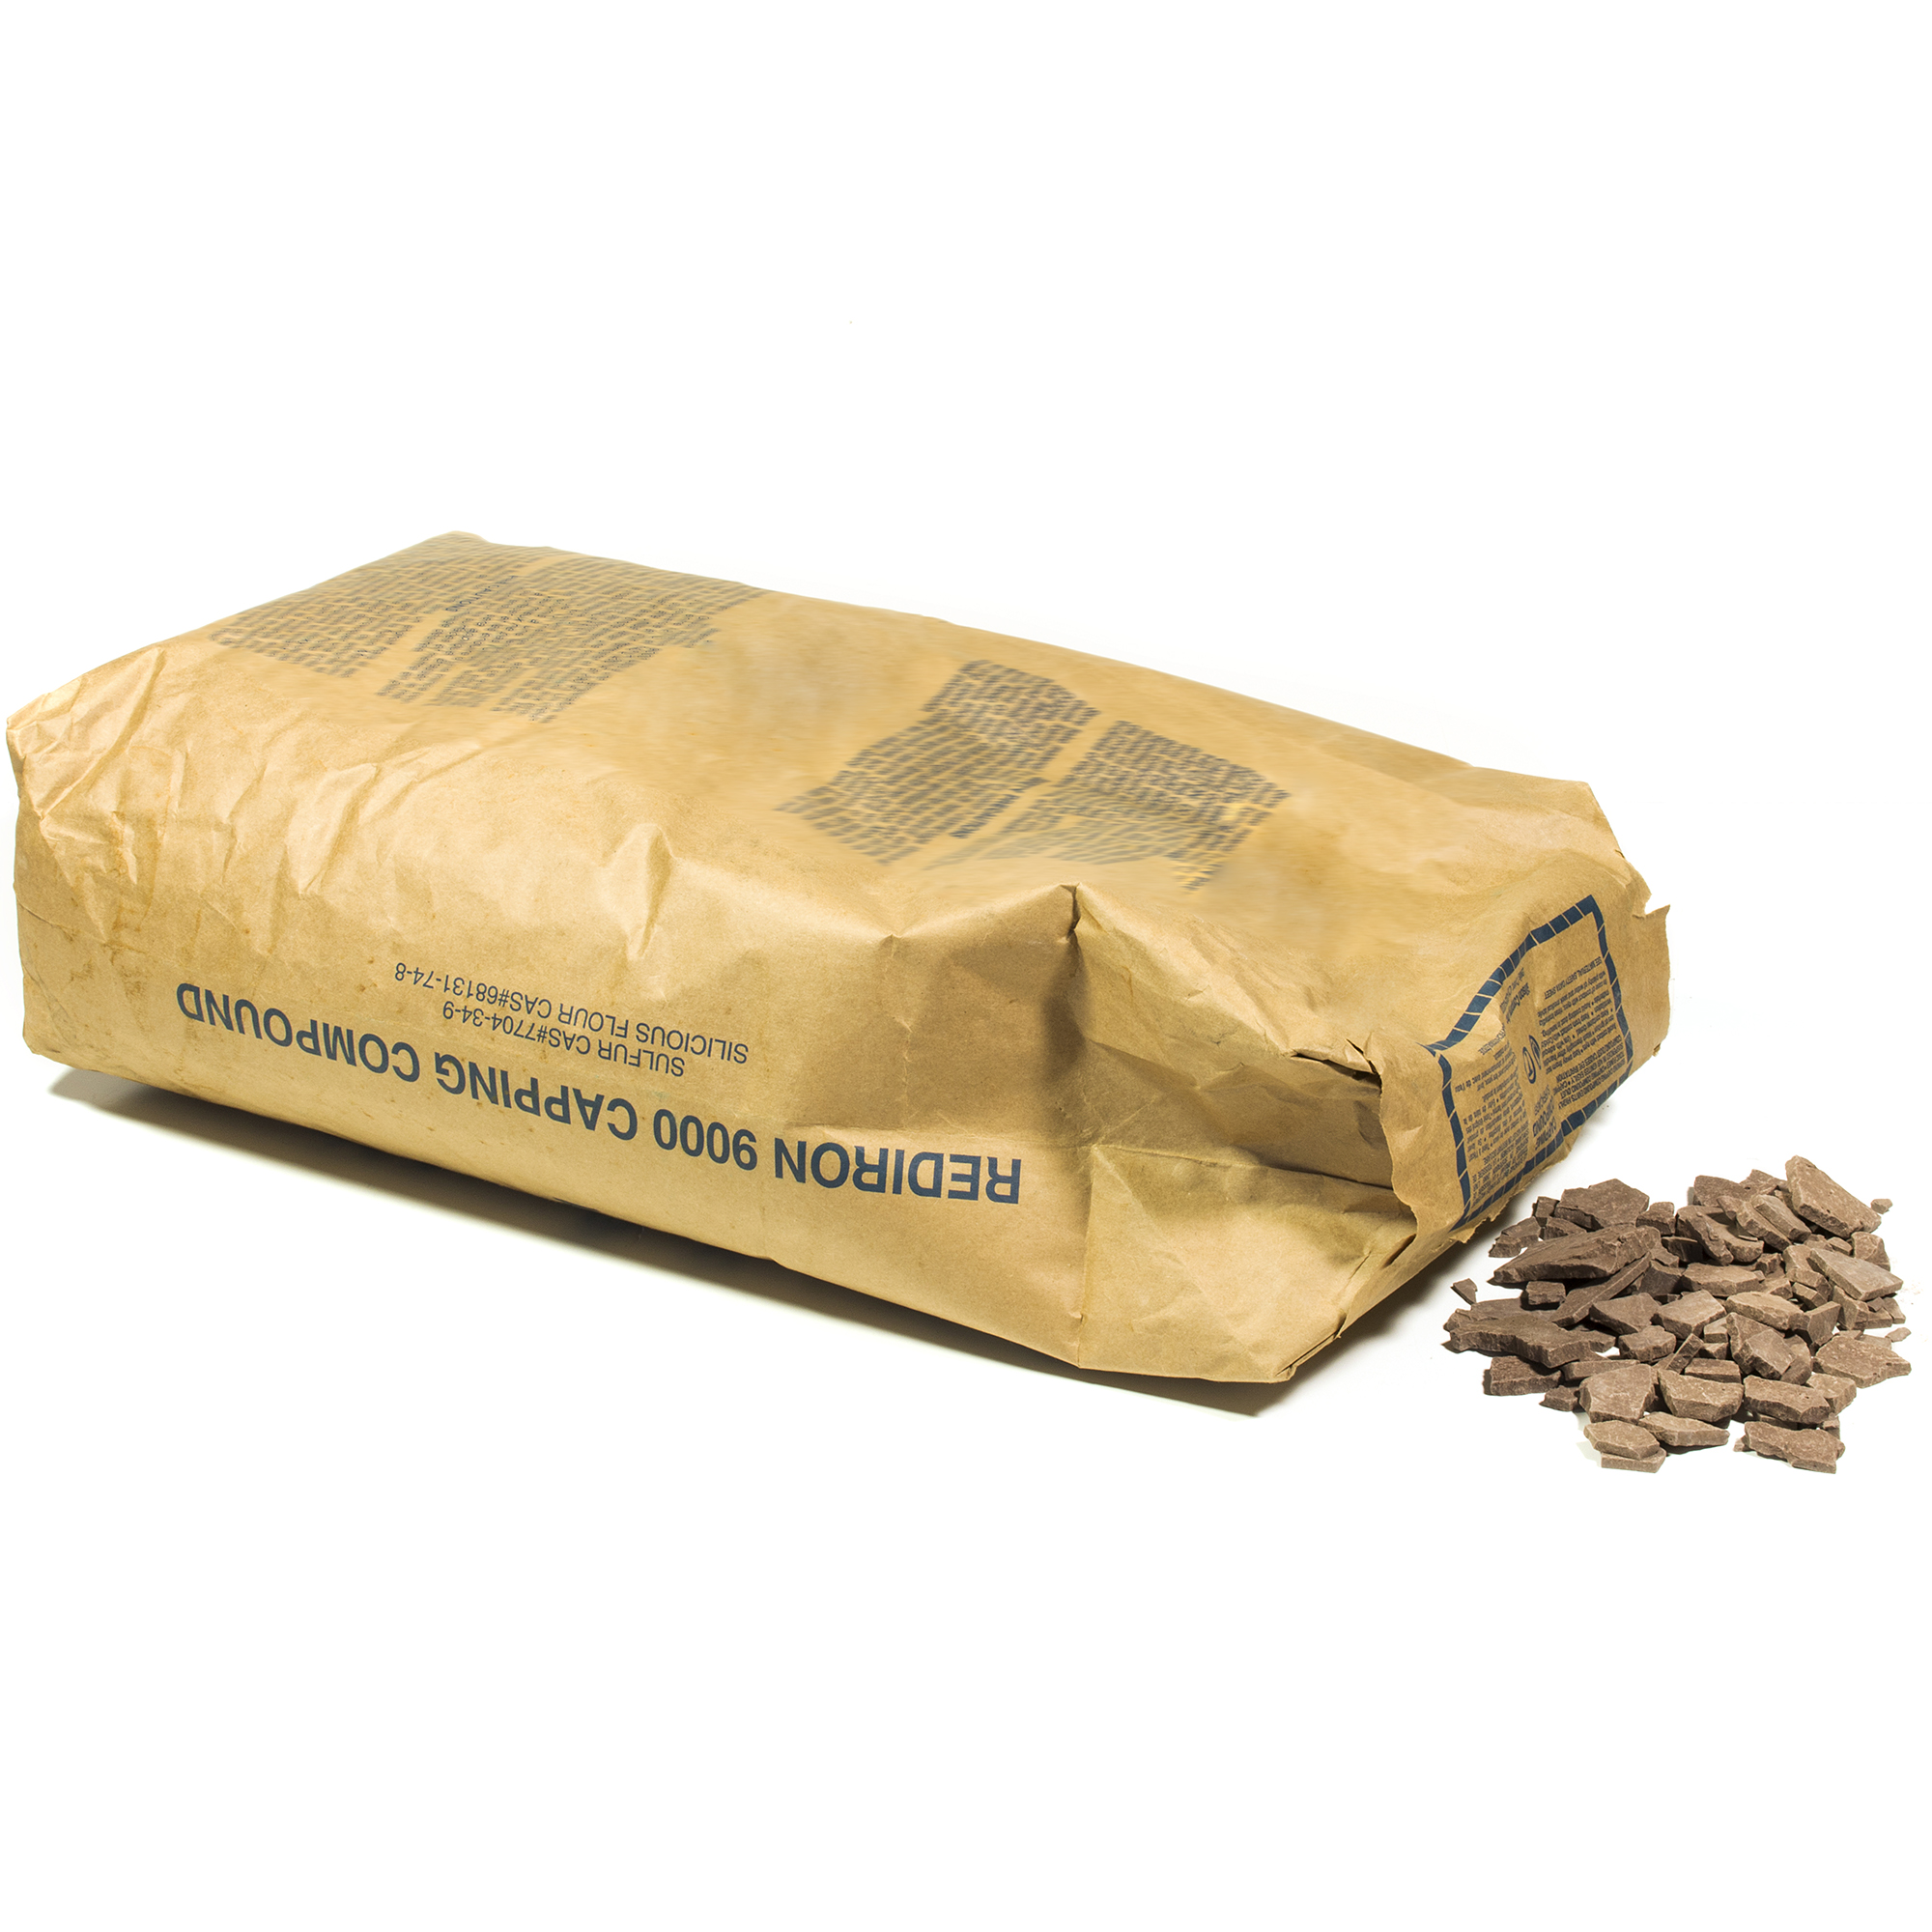 CONT 55-C0121/37 Flake capping compound 22,5 kg bag.